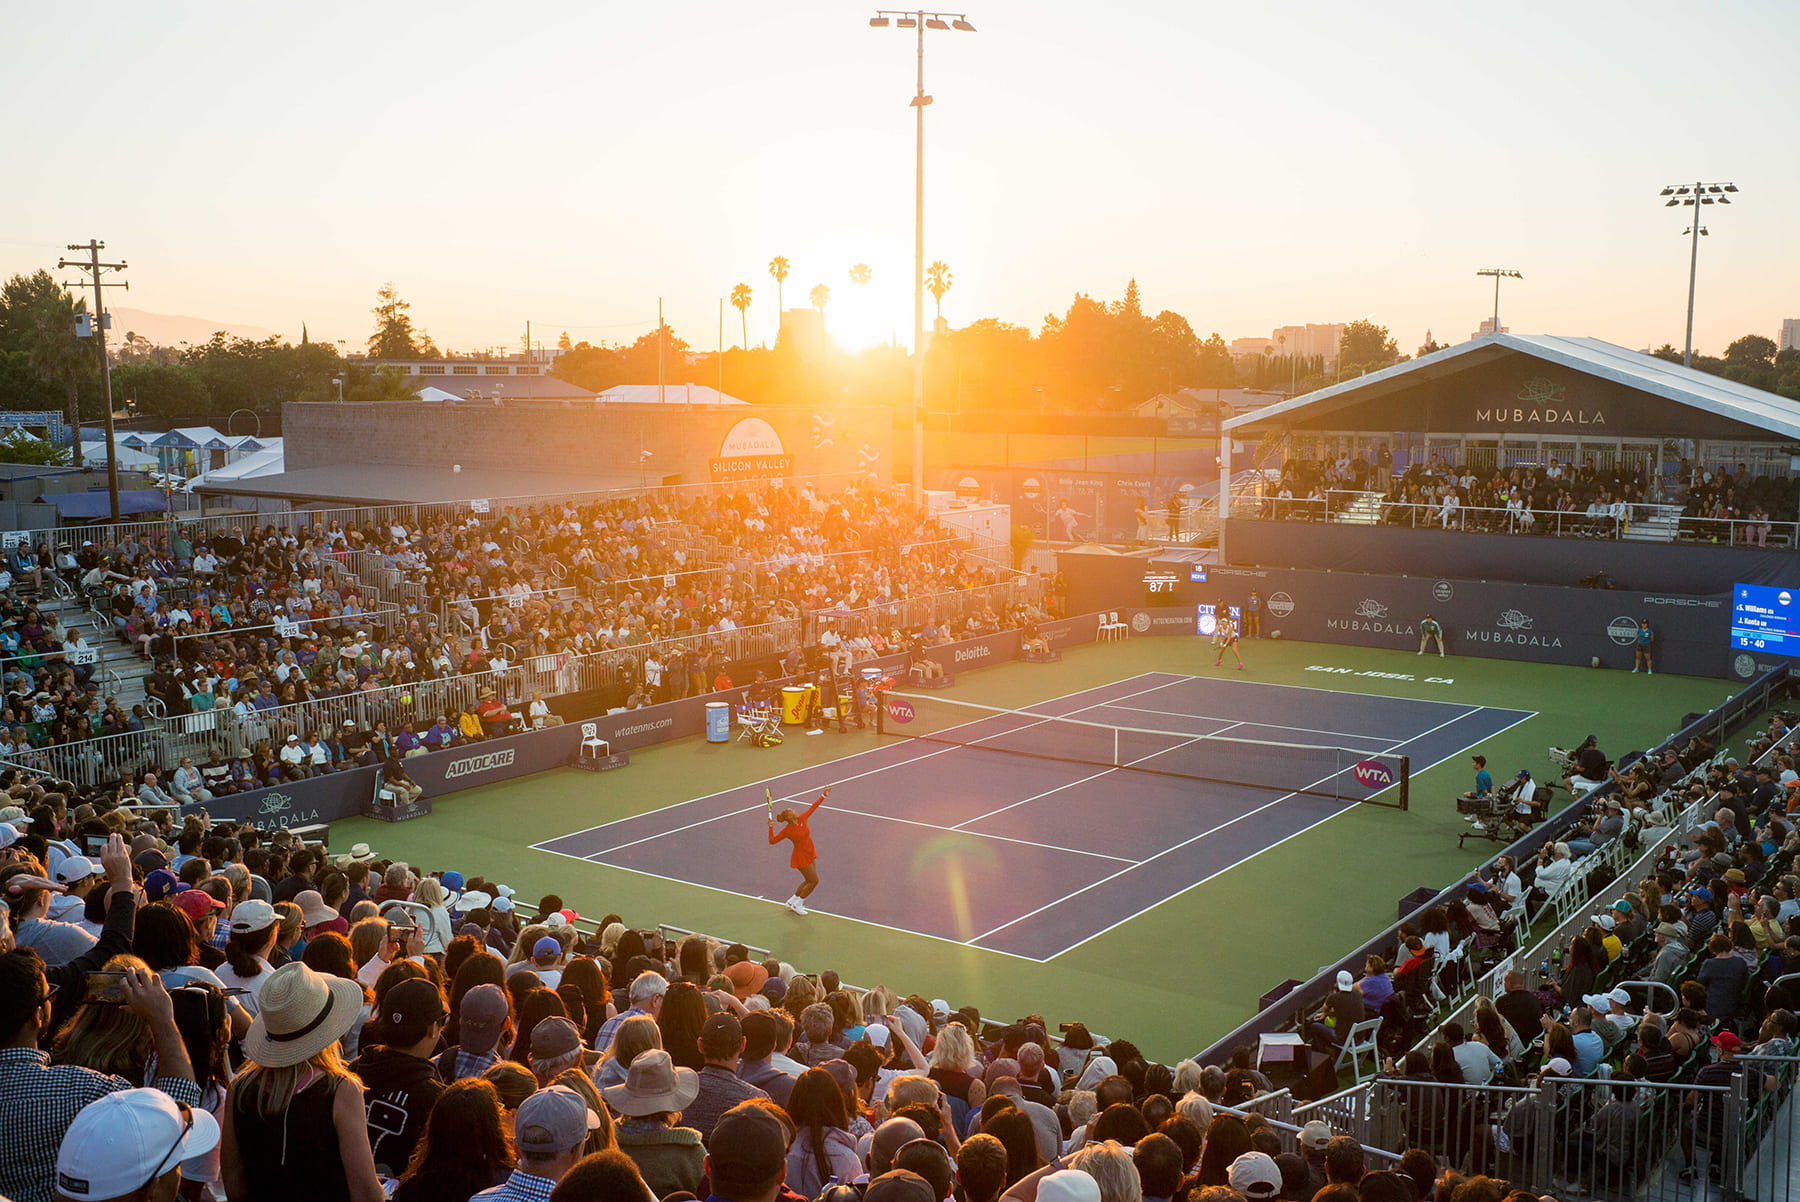 The Mubadala Silicon Valley Classic takes place at the new tennis courts at Spartan Stadium in San Jose, Calif. on Tuesday, July 31, 2018. (Photo: James Tensuan, '15 Journalism)